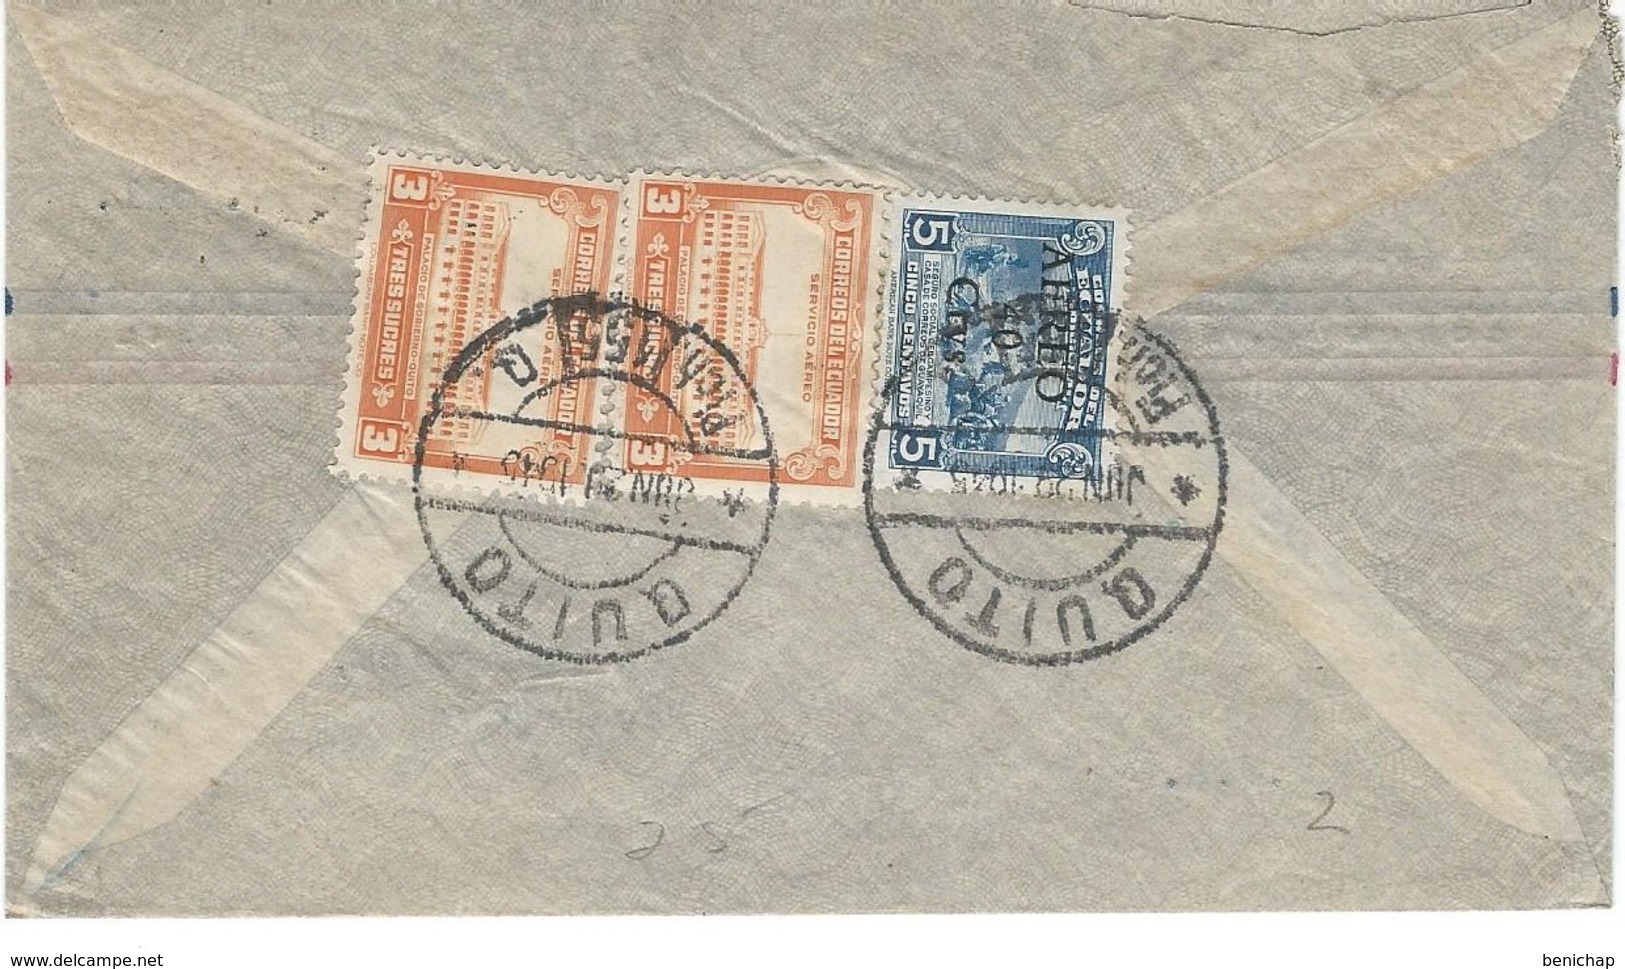 COVER CORREO AERO - AIR MAIL - QUITO - NEW BRUNSWICK - NEW JERSEY. - Equateur